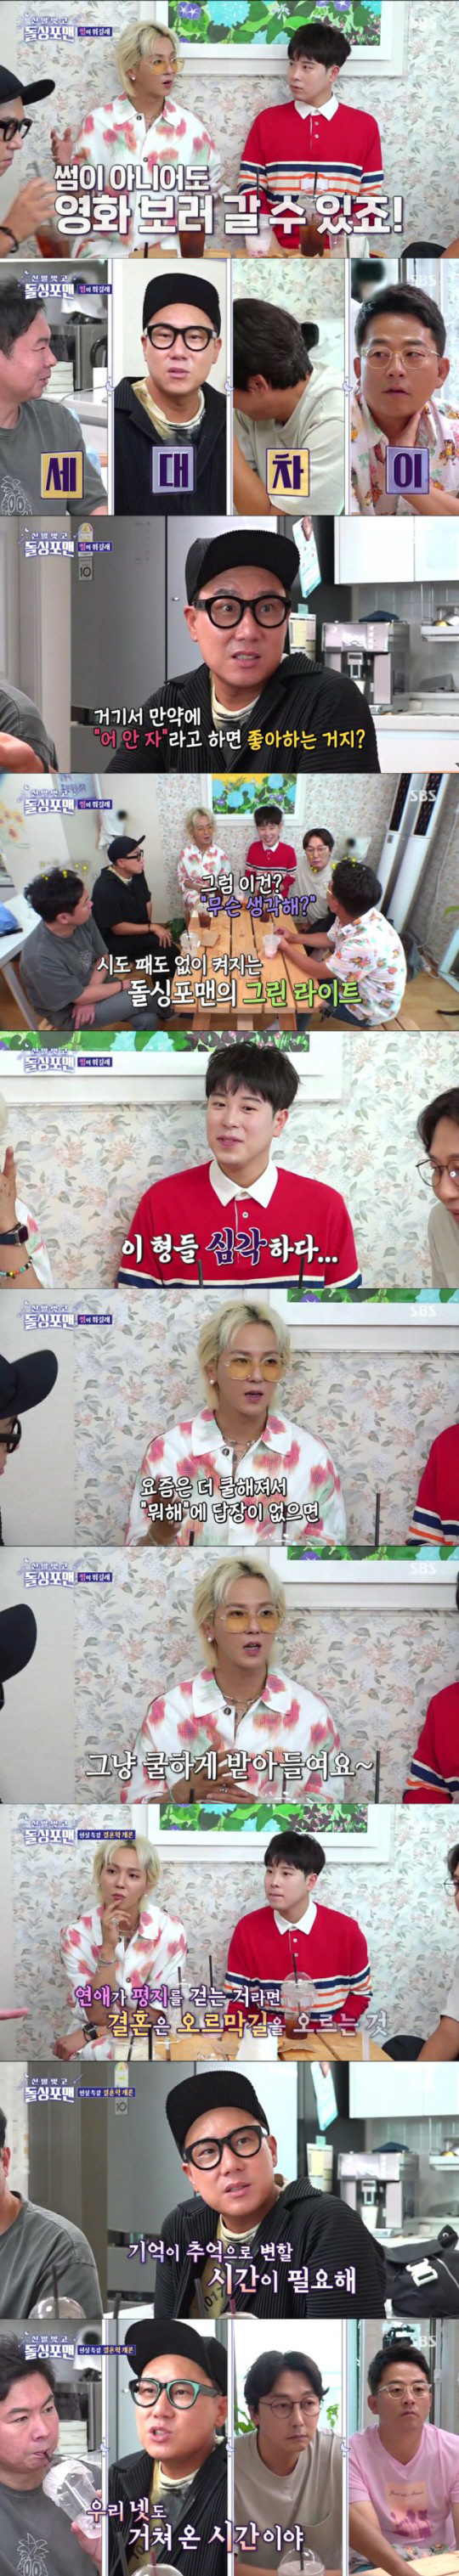 In SBS Take off your shoes and dolsing foreman broadcasted on the 13th, Song Min Ho and P.O were shown to meet Dolsing Foreman as their first guest.On this day, they asked each other about Love and Marriage, and talked about love, parting, and marriage.Lee Sang-min told Minho and P.O. Have you ever had a girl you like?I asked, I never did, and then I told my high school best friend about my experience of losing my girlfriend. Im confident that my favorite girl overlaps.I am confident that all three of you are overlapped. So I expressed my confidence in each other, and I laughed at the king car competition in the Dolsing Forman in an instant.They wondered about the criteria of what is Thumb above all.Dolsing Forman said that it is unconditionally to ride a thumb to go to the theater together with men and women, while Minho and P.O said, You can go to the movie even if it is not a thumb.Especially, when Sangmin asked What are you doing? Janny?, he said, Do you like it when you answer Uh, I do not sleep there?However, Minho and P.O. responded shockingly that these brothers are serious. Minho does not ask Janny?Nowadays, it is cooler and if you do not reply when you say what do you do, you will just get cool. This scene soared to 7.8% on the day and decorated the best minute.Since then, Dolsing Forman has told P.O Minho, who is curious about marriage life, about their marriage.Lim Won-hee said, If Love is walking on the plains, marriage is climbing uphill together.Were the only ones who can make these words easier, we need time for memories to turn into memories, and the four of us have gone through that time, Lee Sang-min said.On the other hand, in the second half, Dolsing Forman 5th member, Dasing Seo Jang-hoononon found Kim Jun-hos house.Seo Jang-hoononon washed his hands as soon as he came home, and he watched the kitchen of Junho, where food waste was hanging out, and gave a nagging voice to Furious.Seo Jang-hoononon has been looking at food waste left in the sink for a long time and said, Did you deliberately do this because I came? Are you crazy?What is all that? Is it okay to leave it like that? he pointed out.Kim Jun-ho said, I put it together for two weeks and put it away at once. Seo Jang-hoonon was surprisedThe lesser Seo Jang-hoononon began cleaning Kim Jun-hos kitchen himself, bagging the rubbish in an envelope, saying: How do you live like this?I smell (stolen waste), he said, unable to hide his shock.Tak Jae-hun, who saw this, said, Ive never seen anyone do that in another house, and Lee Sang-min also asked, Jang Hoon, is not it tired to live like that?So, Seo Jang-hoononon said, I think so. Basically, people should live like people. I have to clean up things.Smells and boils fly, he said enthusiastically.Youre just gonna let it go for a week? If you dont want to clean it up, youre gonna have to clean it up.I have to live with it, he continued to nag at Kim Jun-ho.Dolsing Forman is I do not think I can live with a woman who is not clean, I am good at housework and am friendly., and so Seo Jang-hoononon said, Its easy to live with me, I do it all, I dont nag, Kim Jun-ho.If I am a favorite person, why are you nagging? Then Lee Sang-min said, You say you do it. I do it once or twice.What if your loved one keeps dizzying? Seo Jang-hoononon said, Do not you say you meet your wife?My philosophy is that if I meet a true person, I think we can overcome it all. On the other hand, Take off your shoes and dolsing foreman is broadcast every Tuesday night at 10 pm.